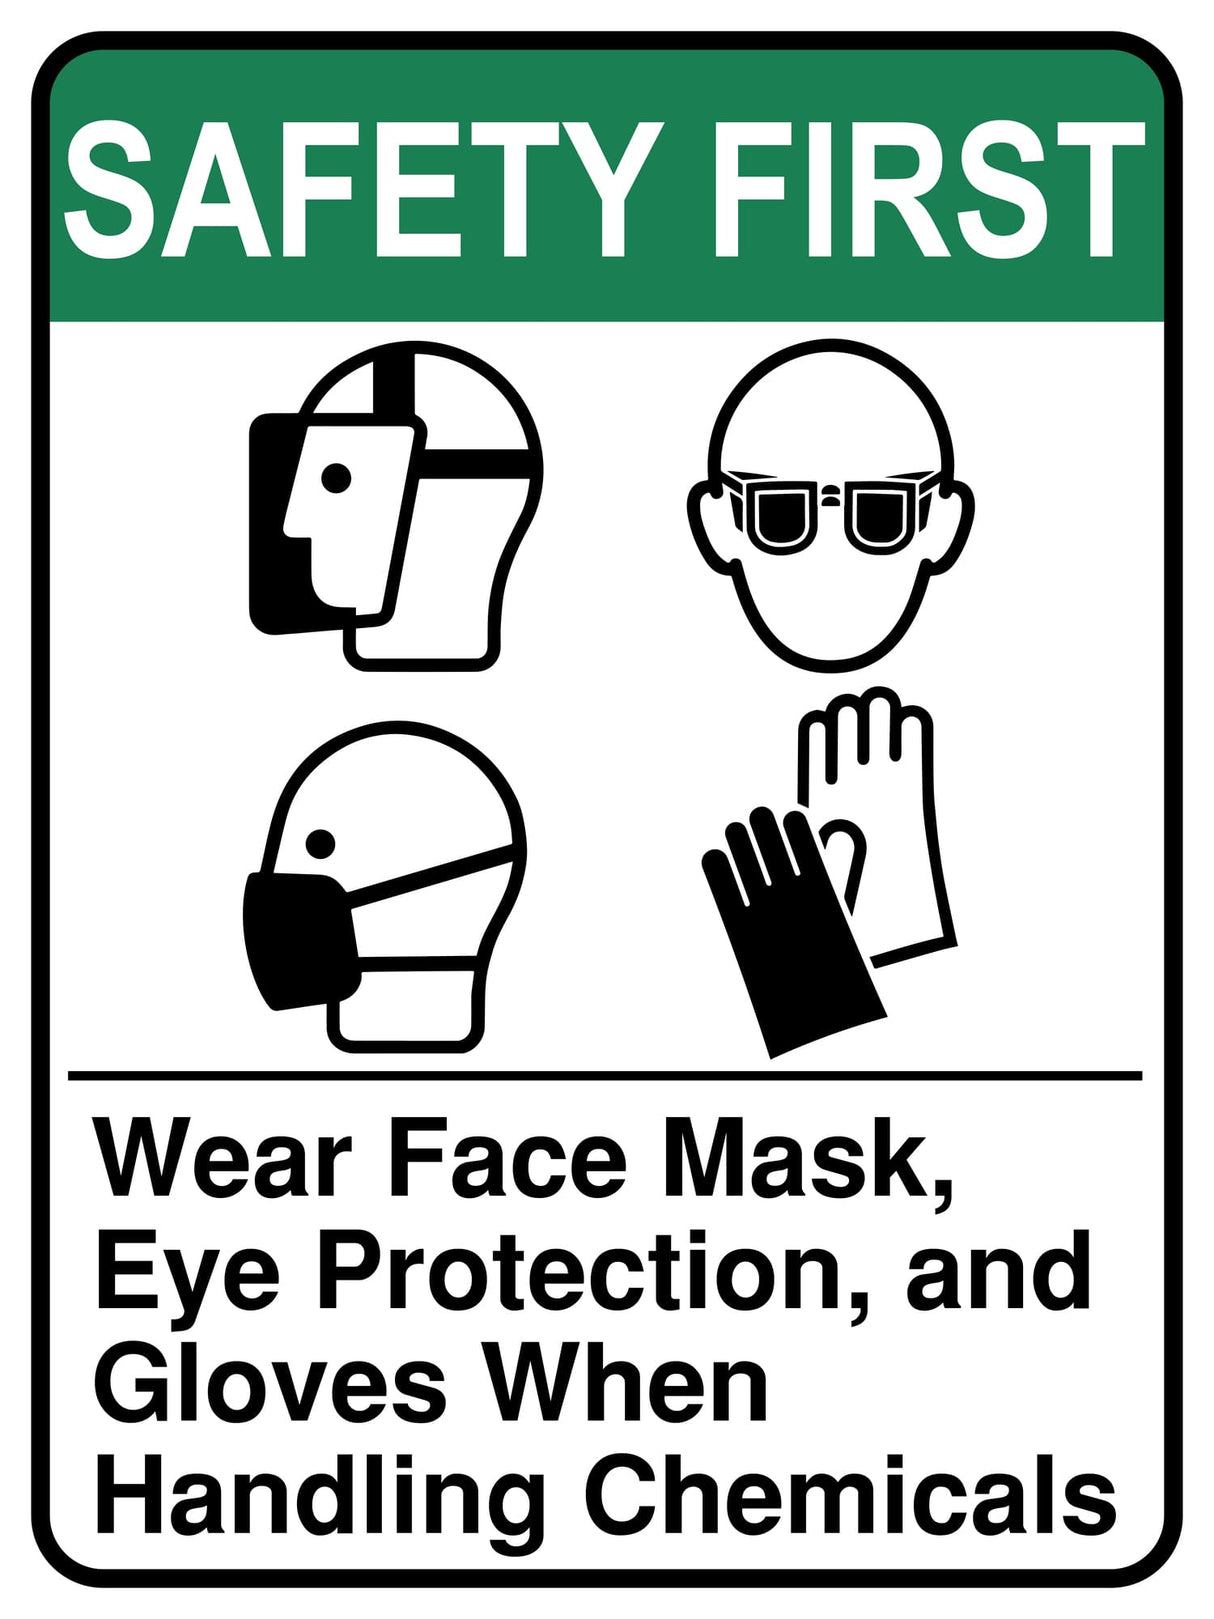 Wear Face Mask Eye Protection And Gloves When Handling Chemicals